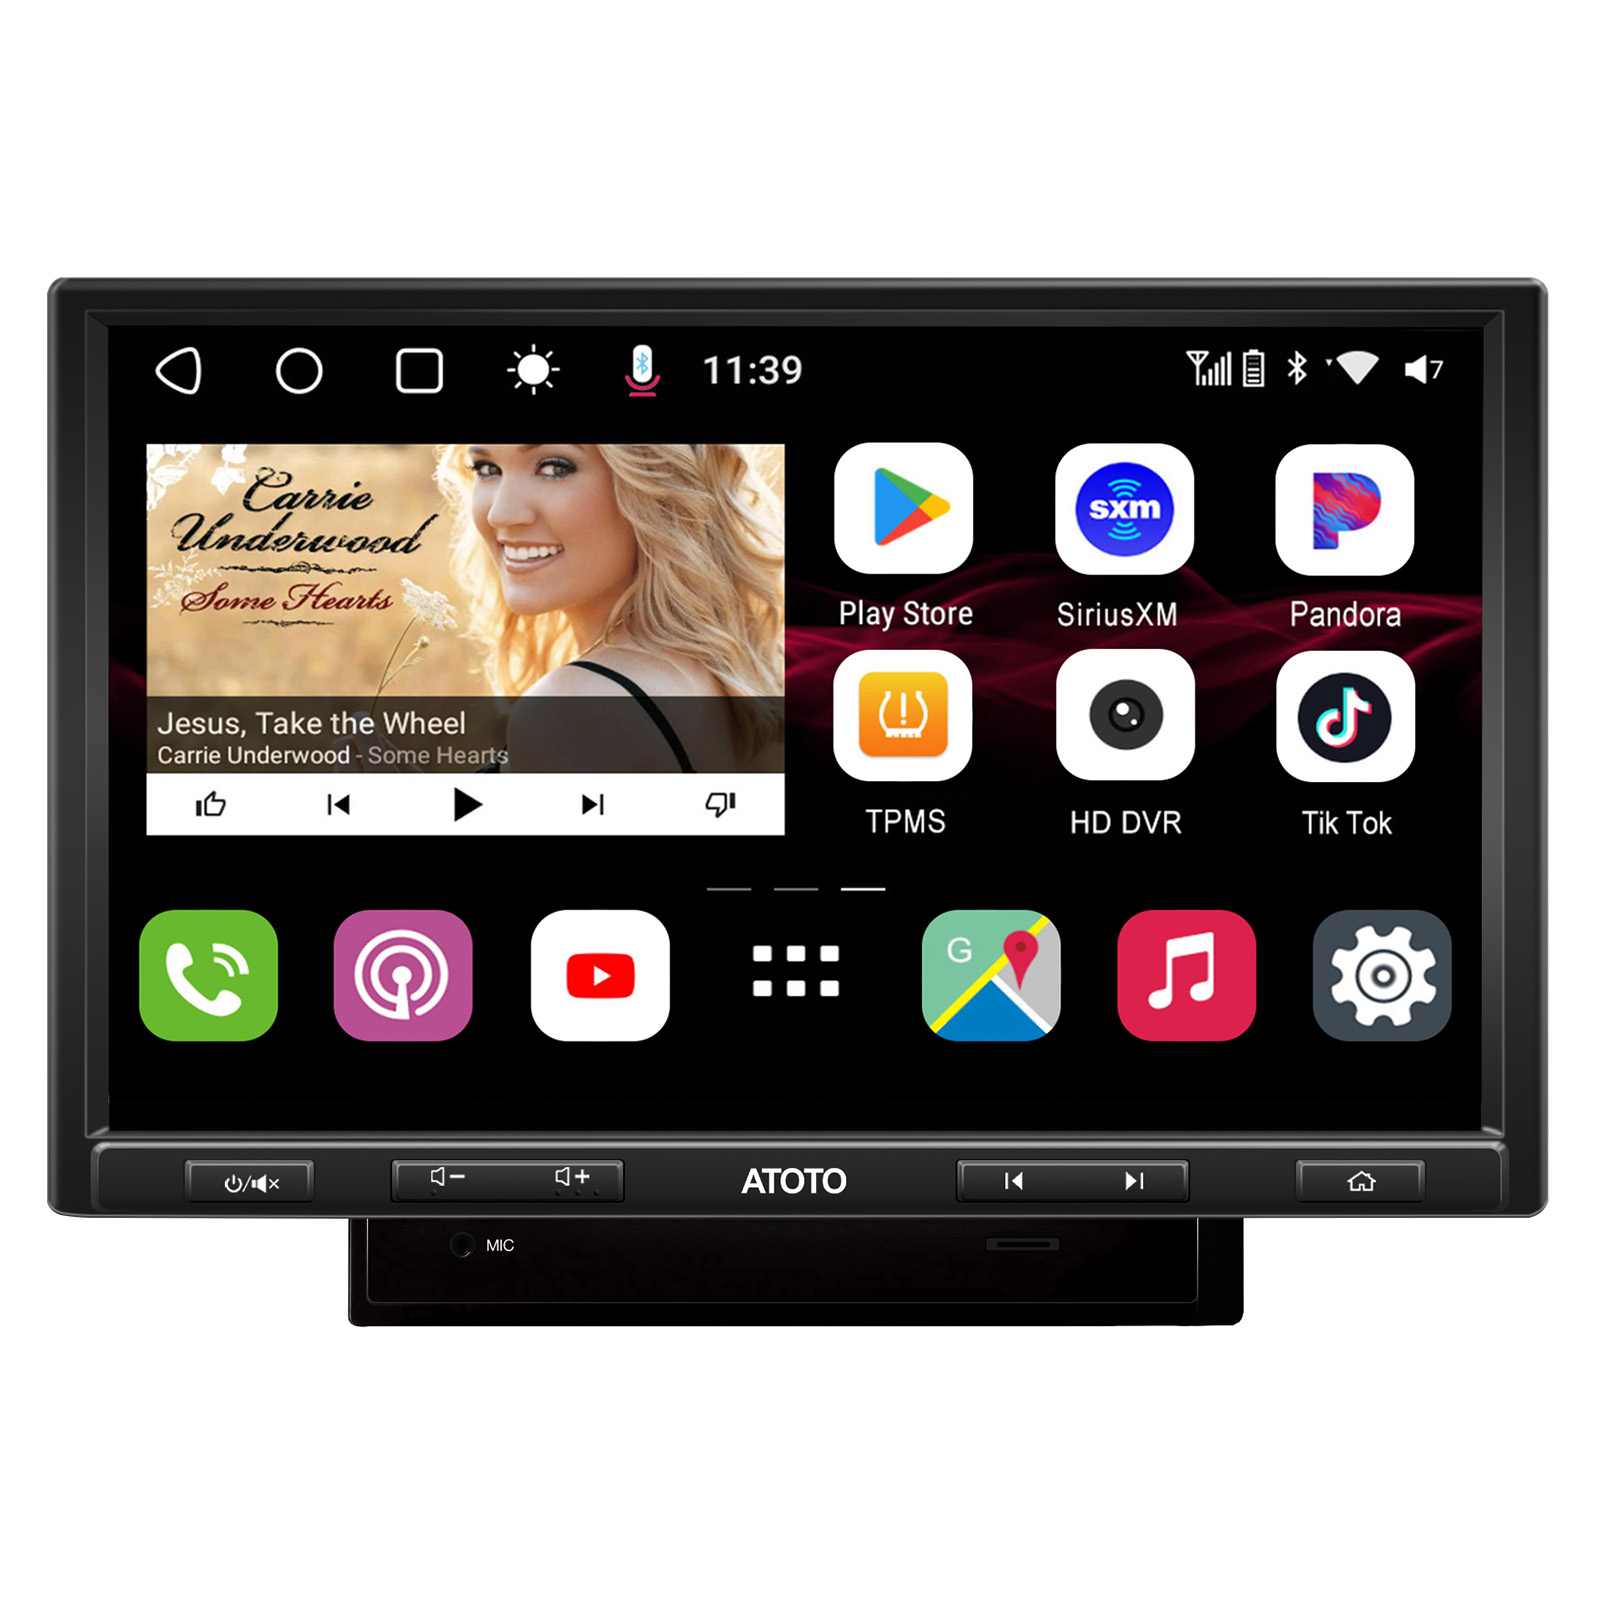 ATOTO S8G2104PR N Android Car Stereo Wireless Apple Carplay and